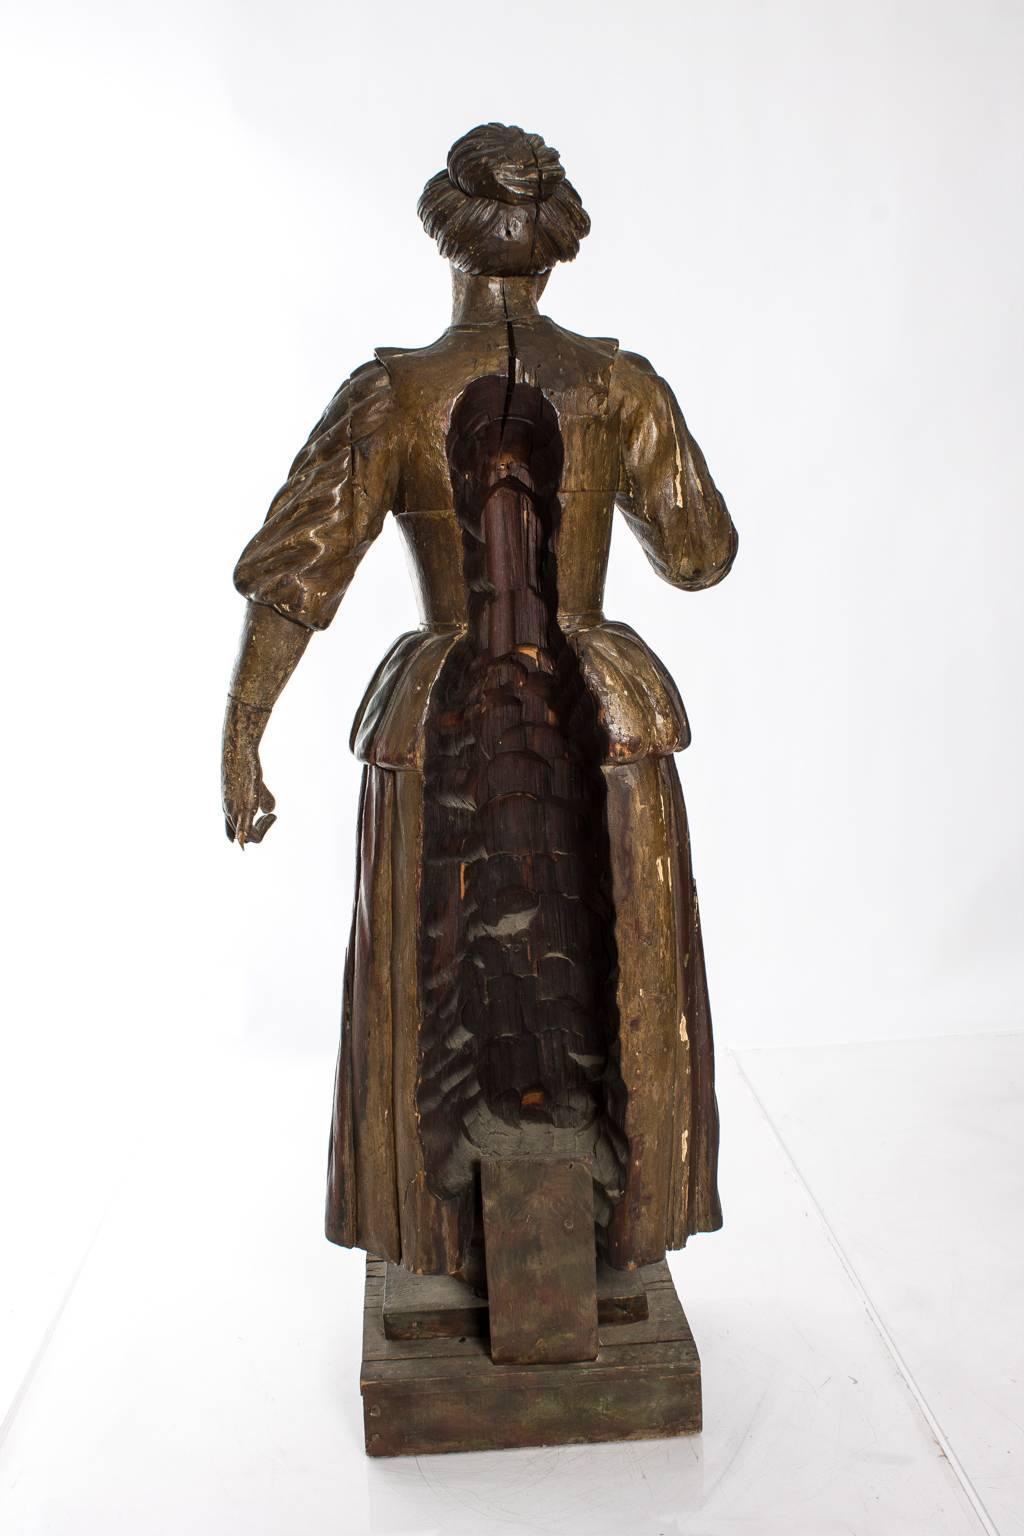 Carved lifesize Victorian figure of a maid. This piece was possibly an architectural element of a larger wooden structure (you can see on the back where the figure was attached), such as staircase.